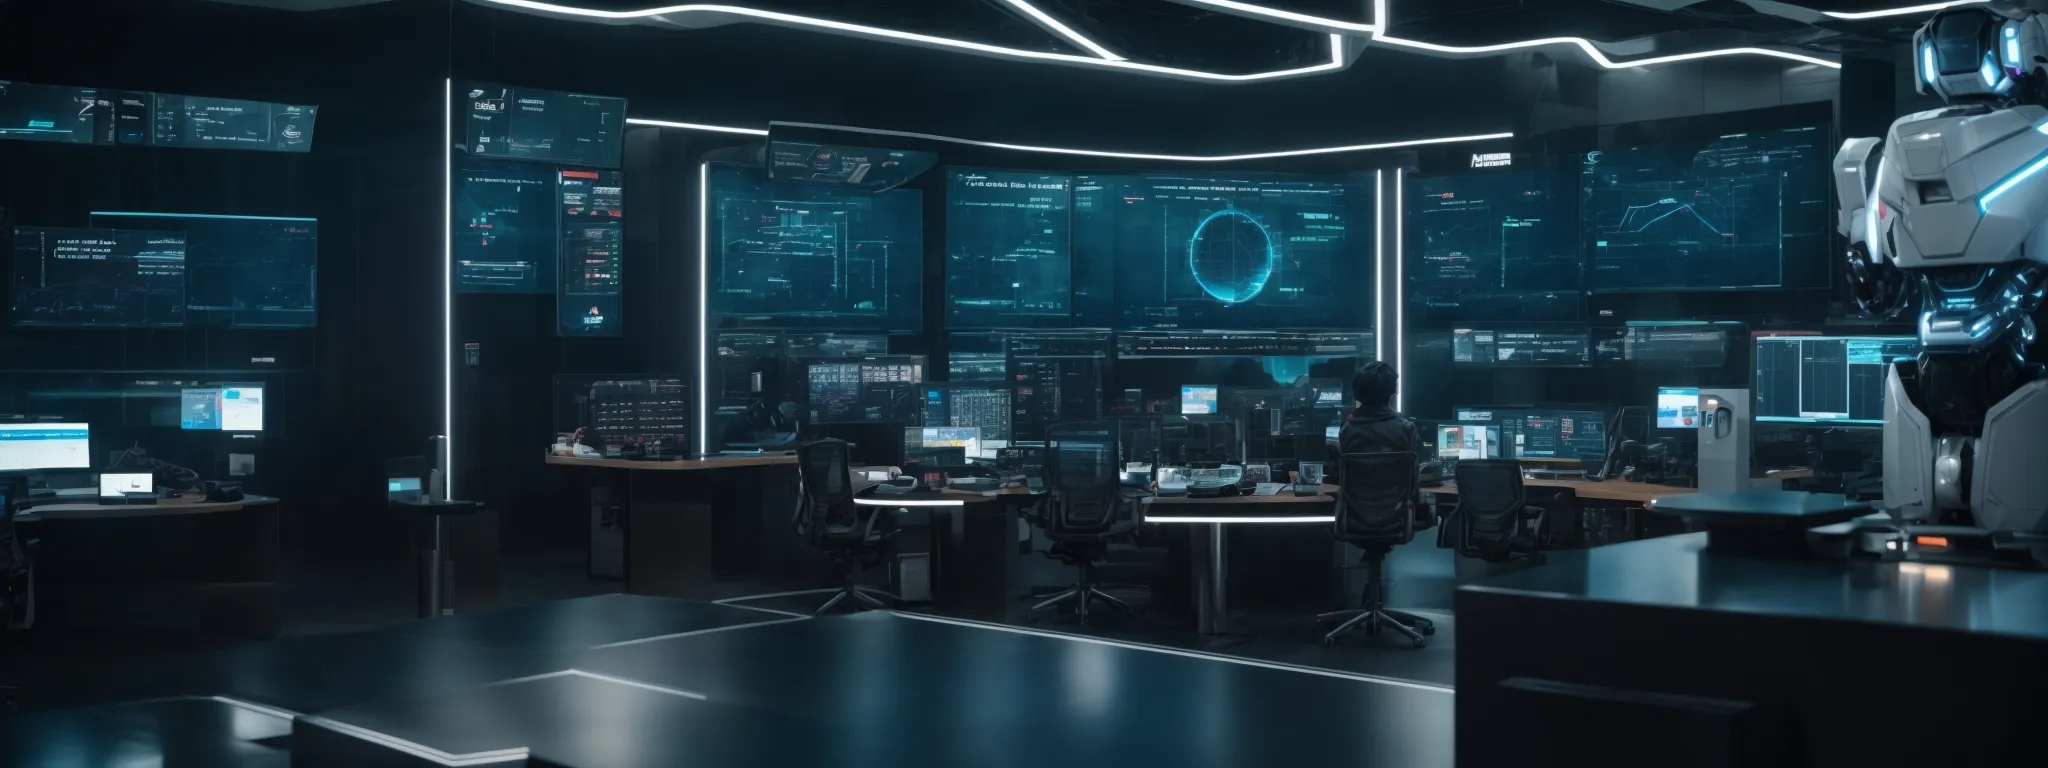 a futuristic command center with screens displaying data analytics and a humanoid robot interacting with a digital content strategy interface.